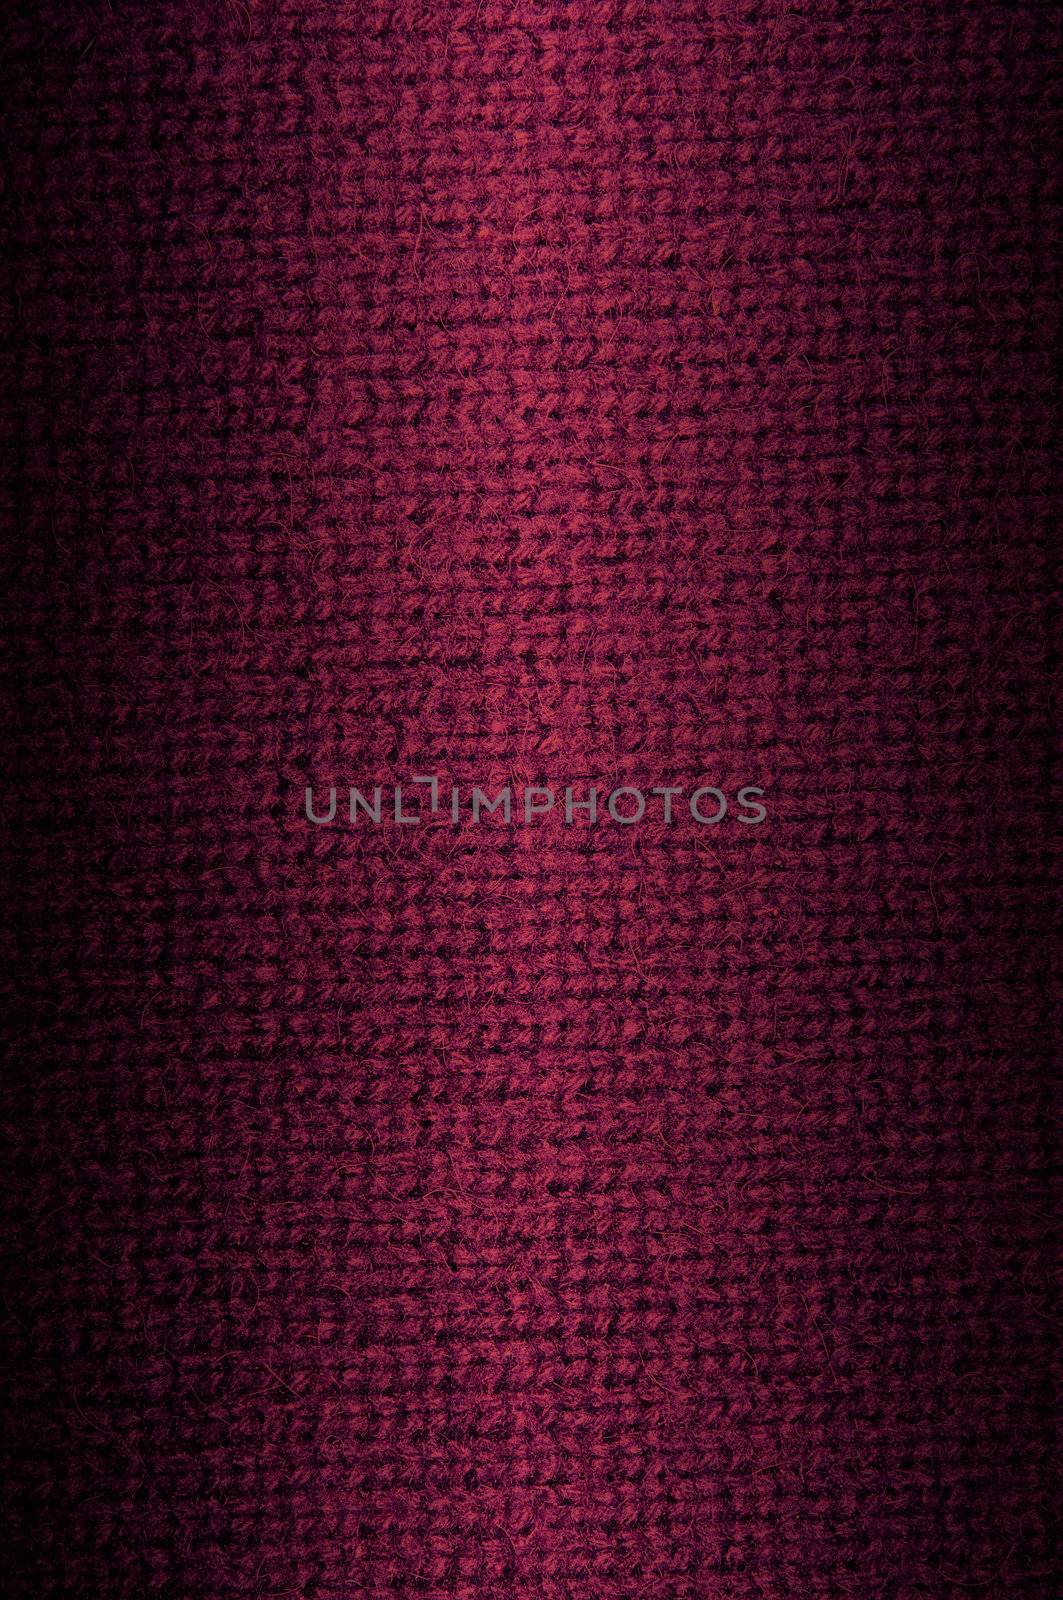 Background a texture a knitted woolen fabric of dark crimson color. Vertical